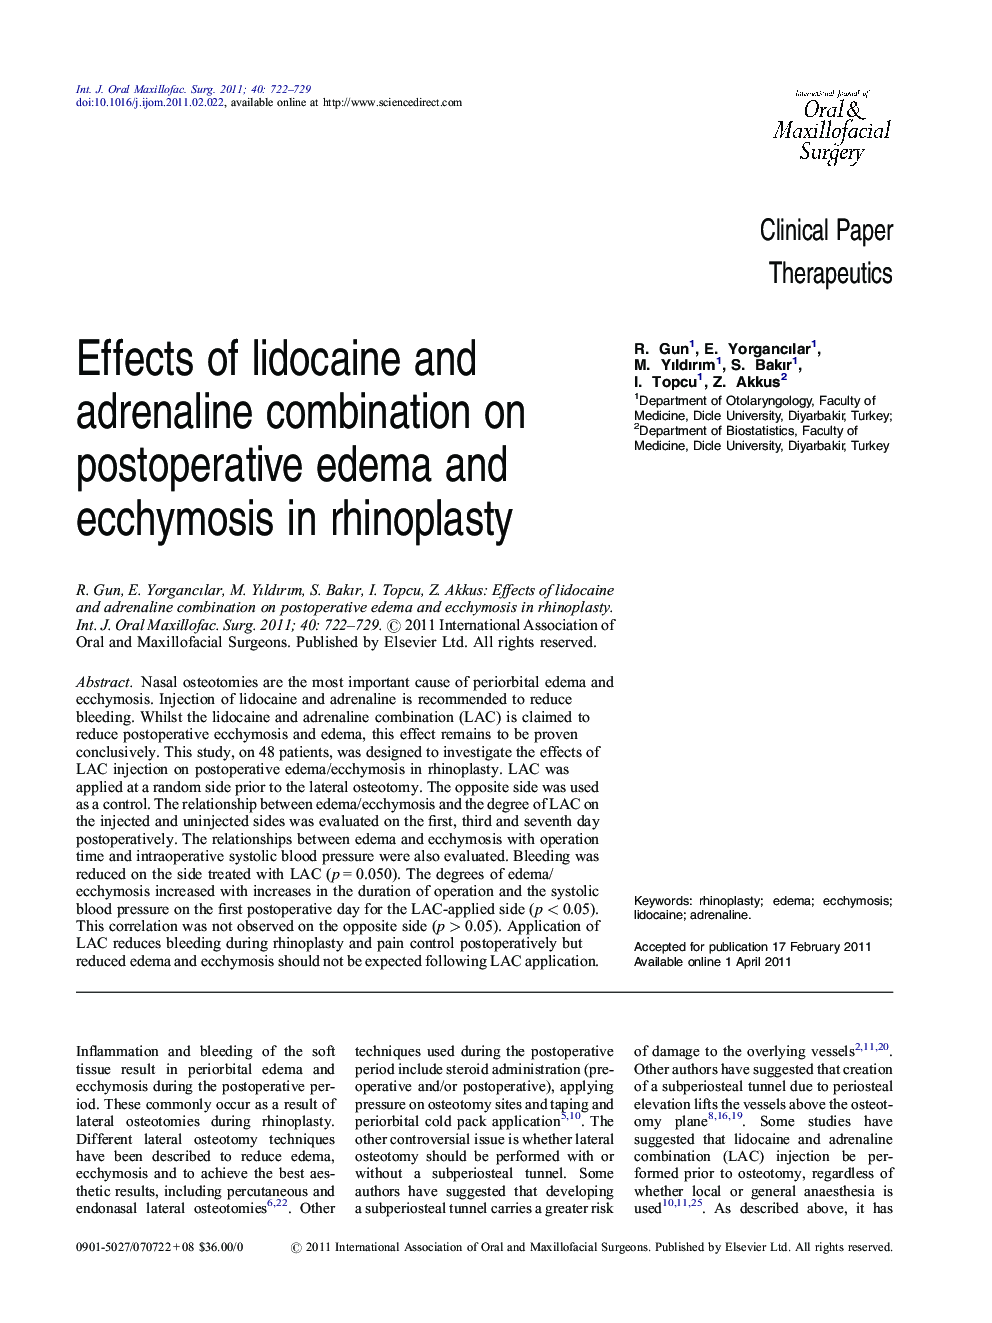 Effects of lidocaine and adrenaline combination on postoperative edema and ecchymosis in rhinoplasty